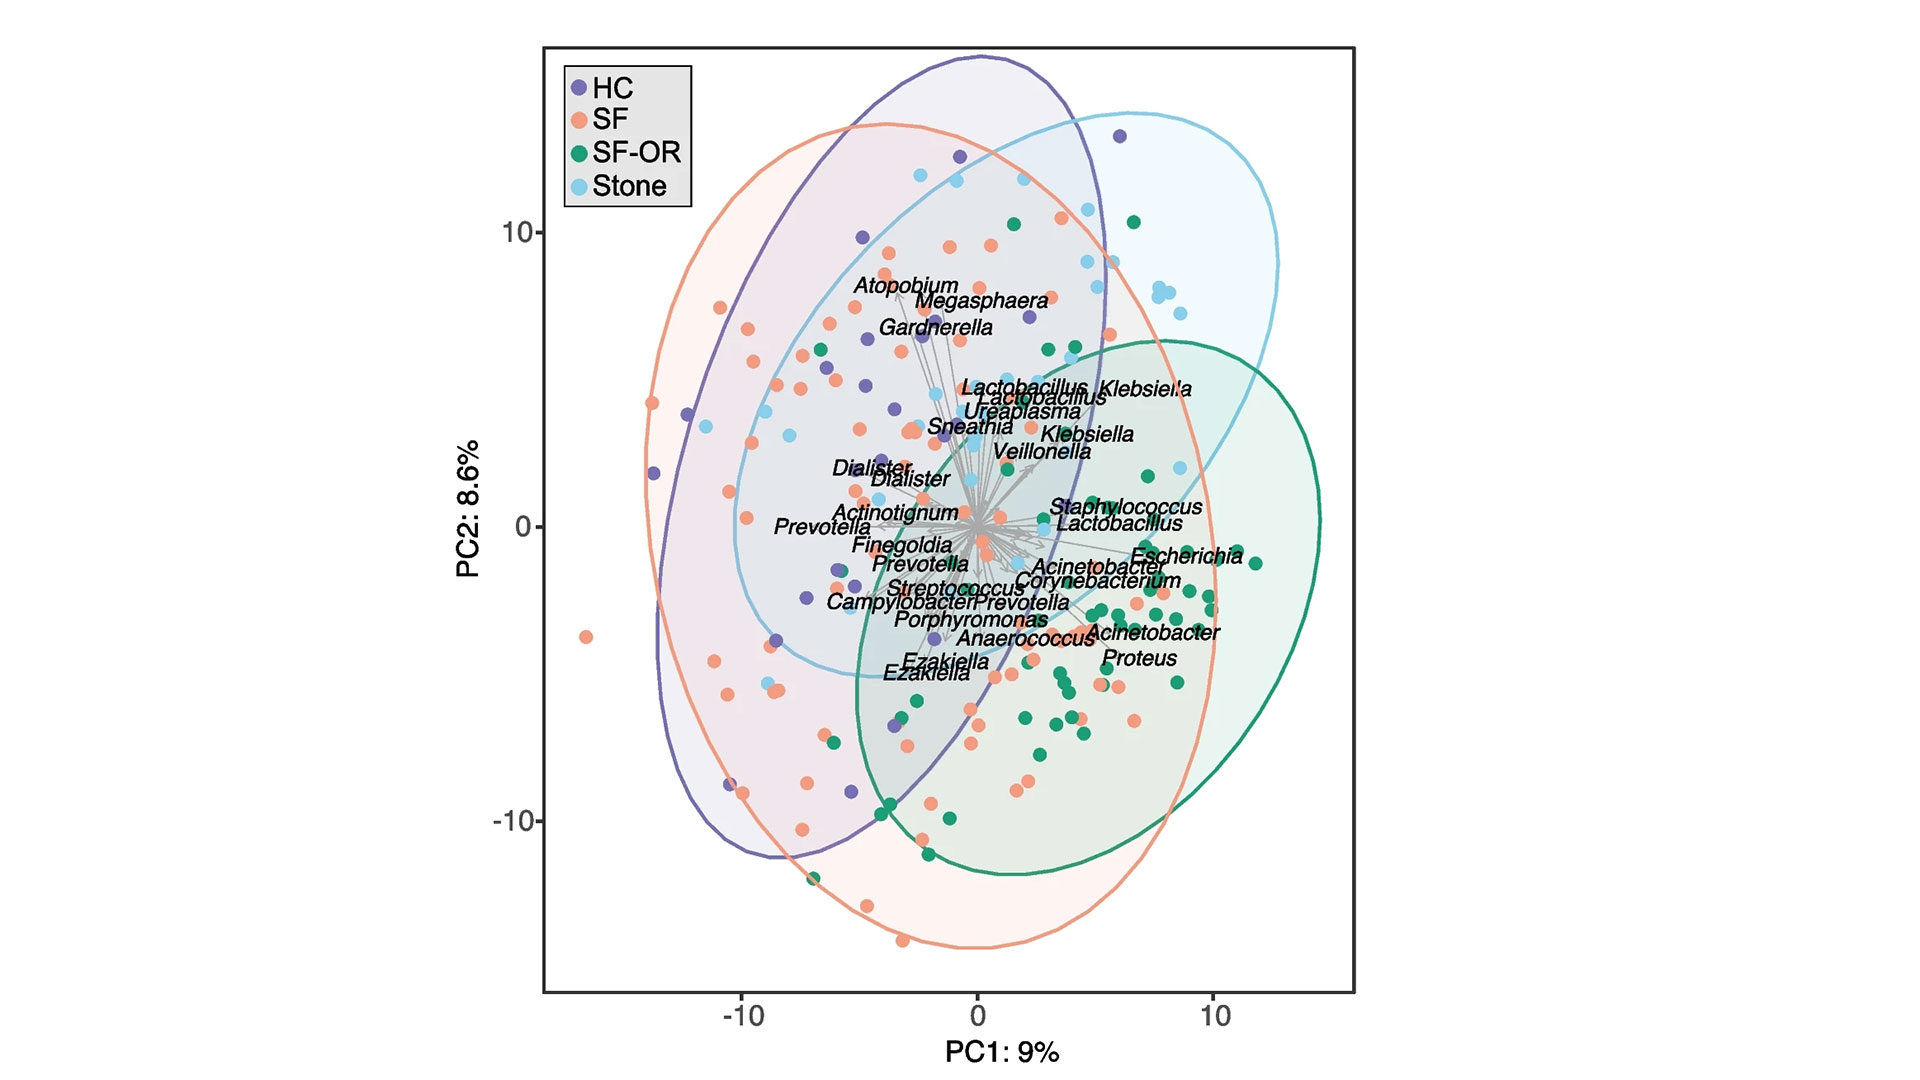 Differences in the microbiome composition in the urine of healthy controls (HC), stone formers (SF), stone formers during surgery (SF-OR) and the kidney stones themselves (Stone) are seen in this analysis.